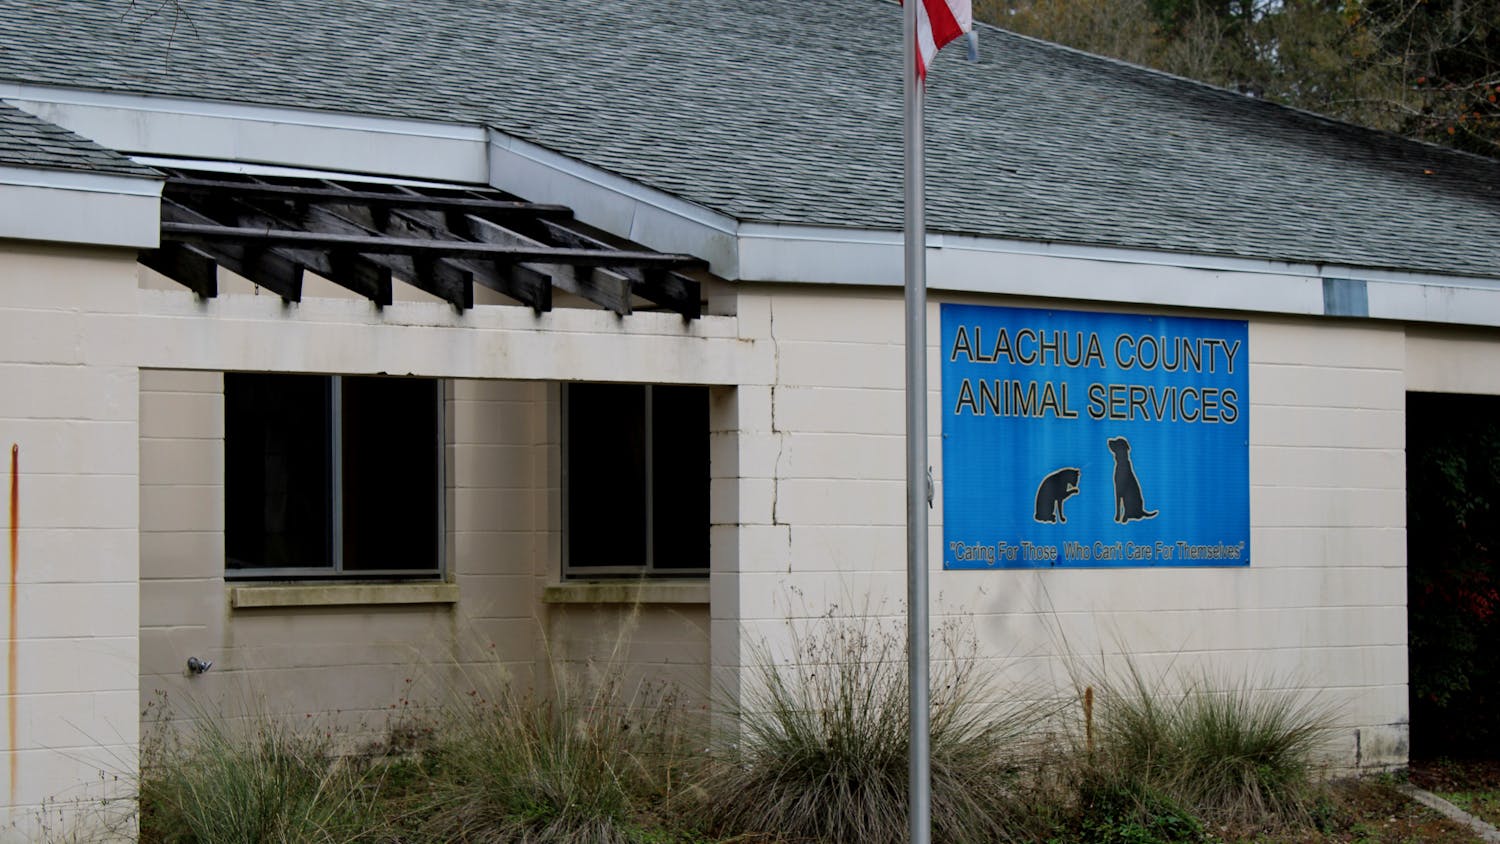 The Alachua County Animal Services building is seen on Friday, Jan. 28.